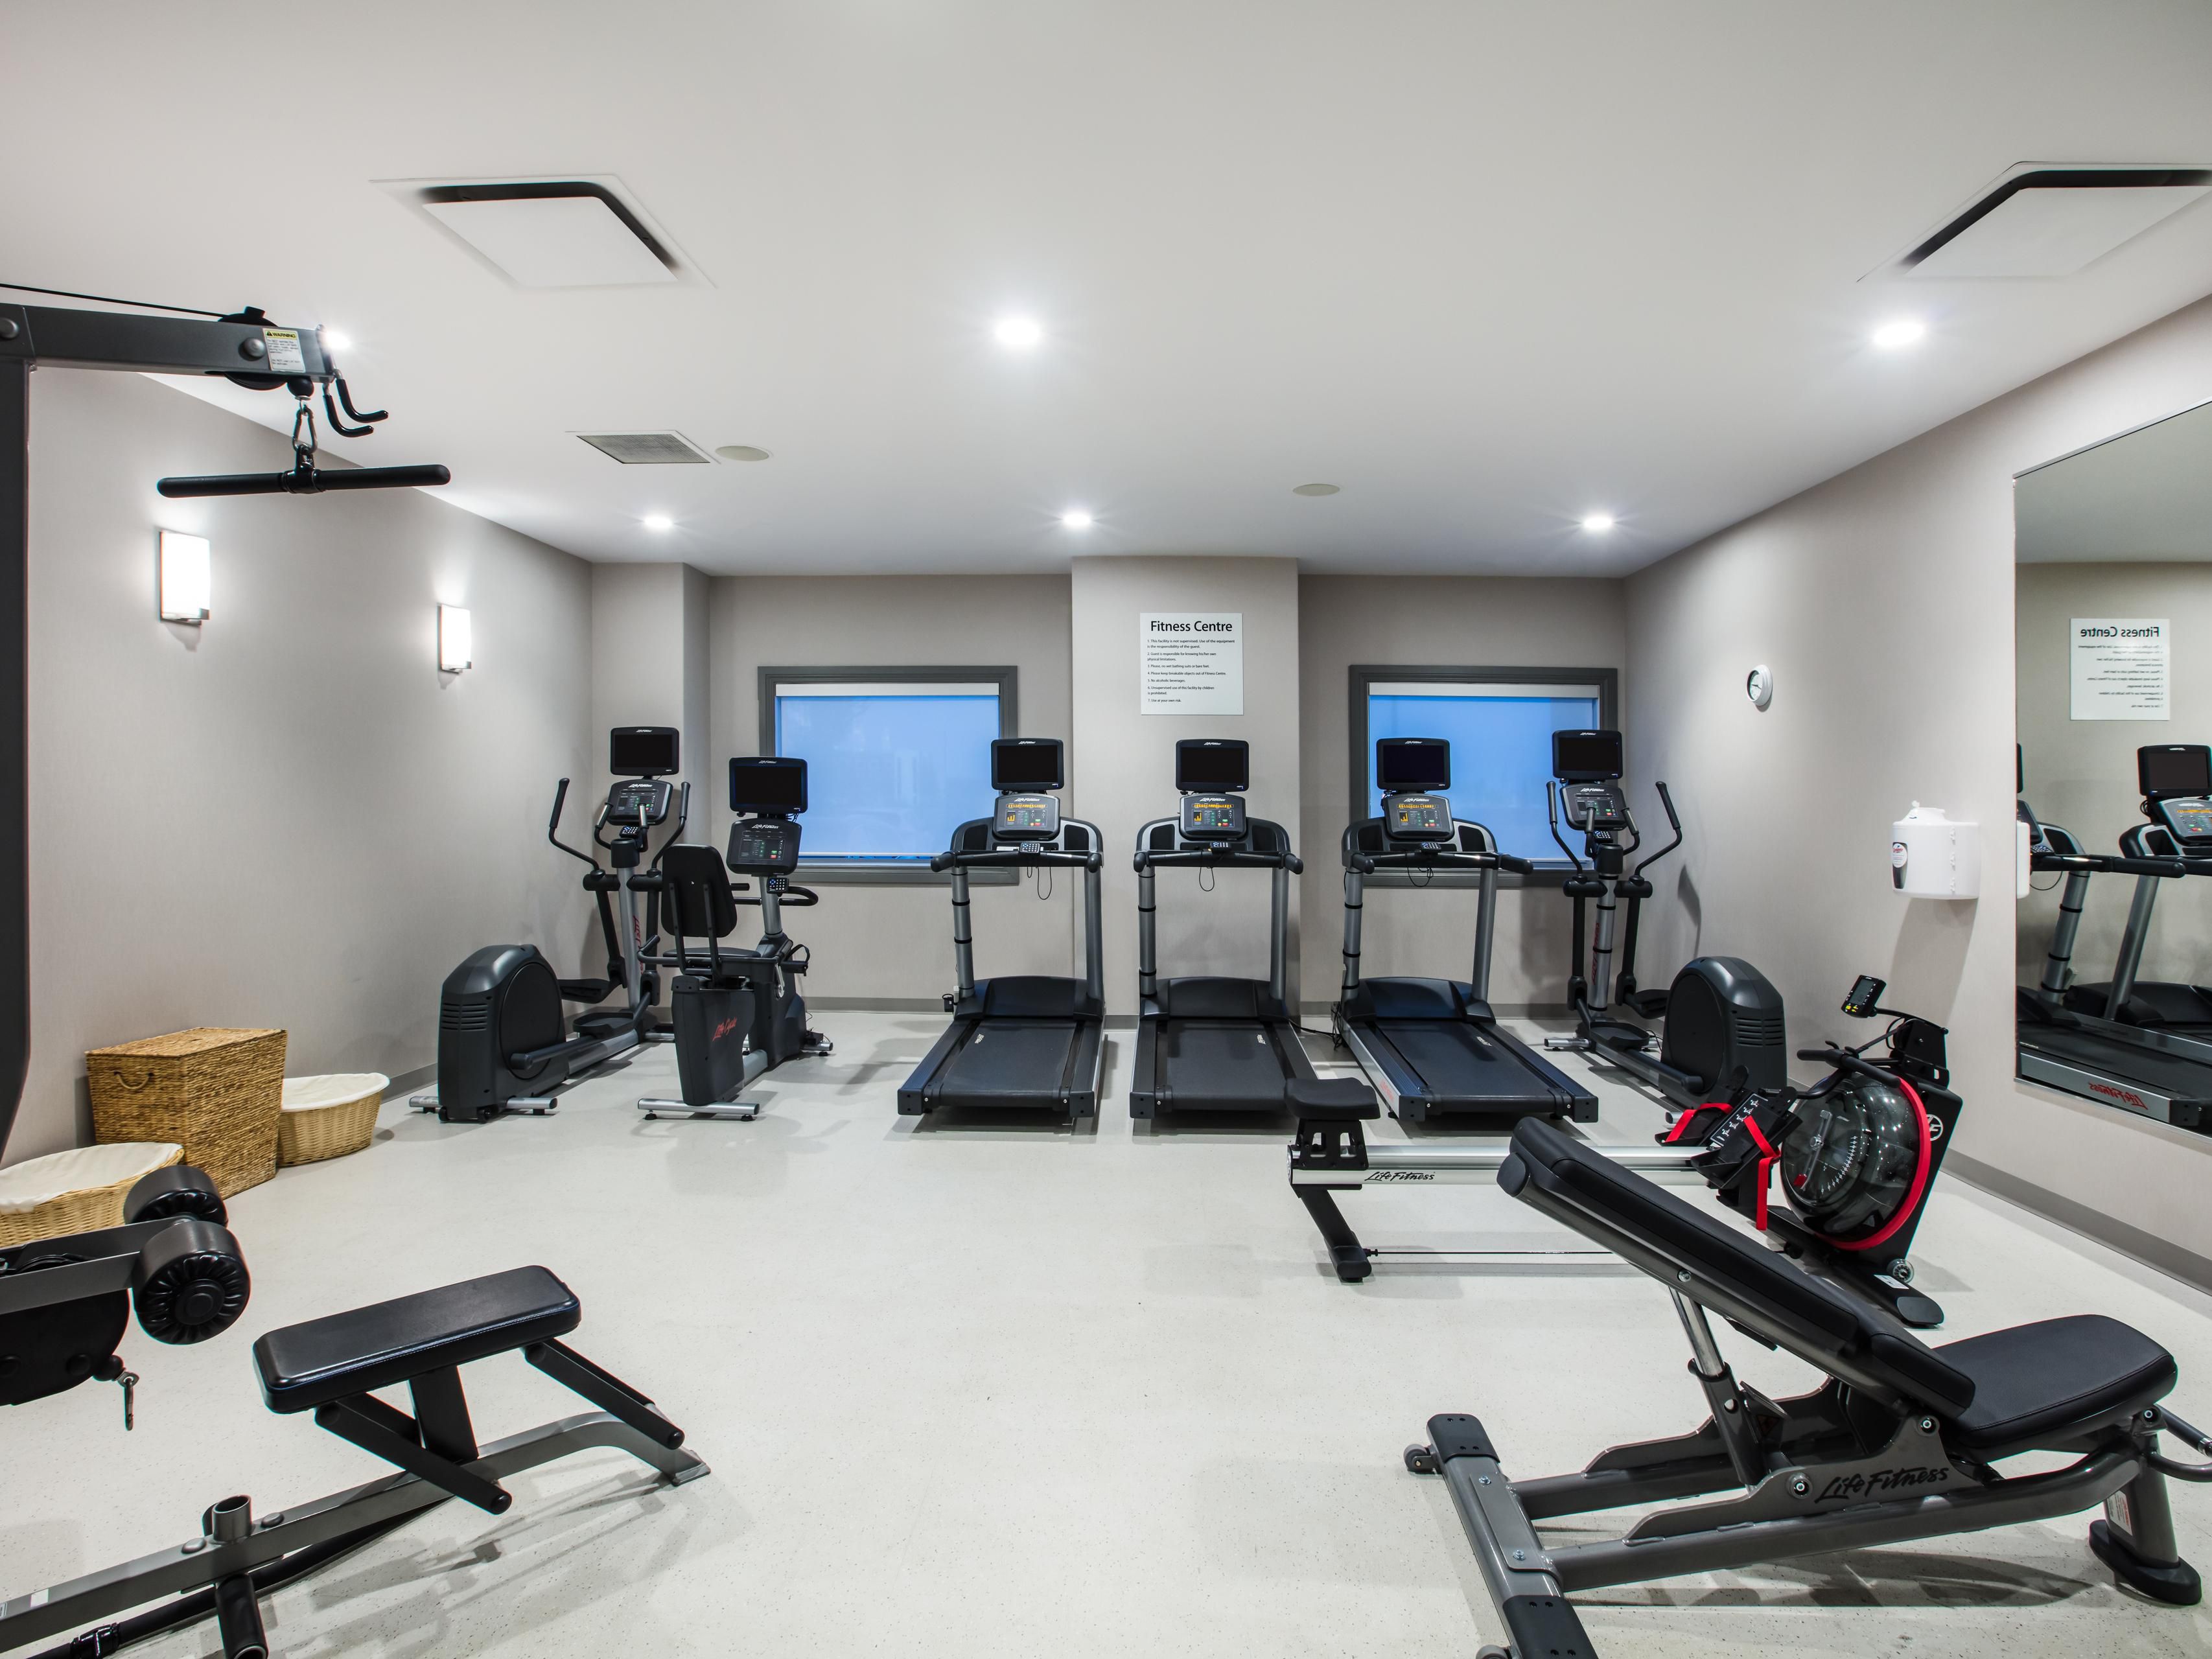 Our onsite fitness center has everything you need to get in a great workout on the road, so you don't have to feel like you're out of your routine. We've got treadmills, elliptical, recumbent bike, rowing machine, universal machine, and more!